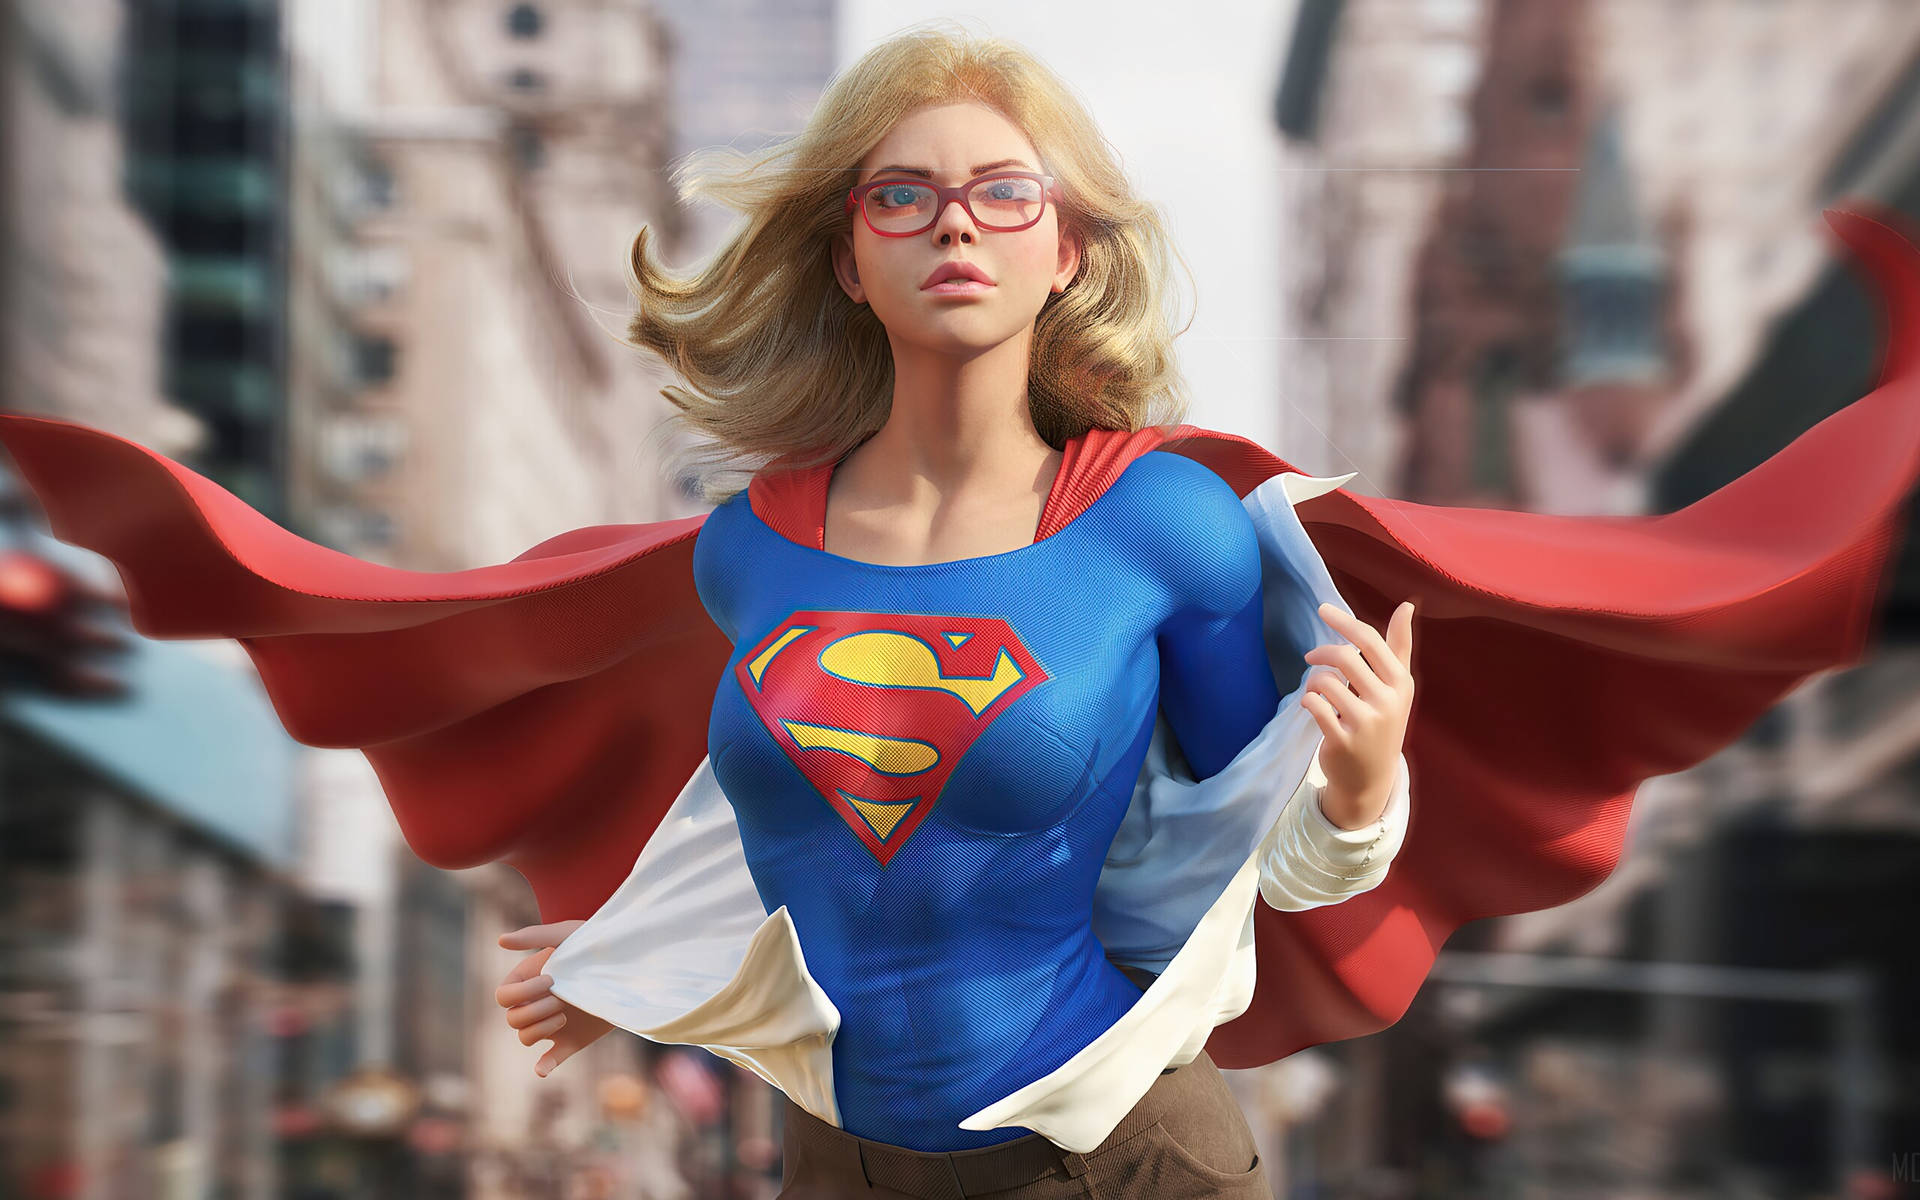 2560X1600 Supergirl Wallpaper and Background